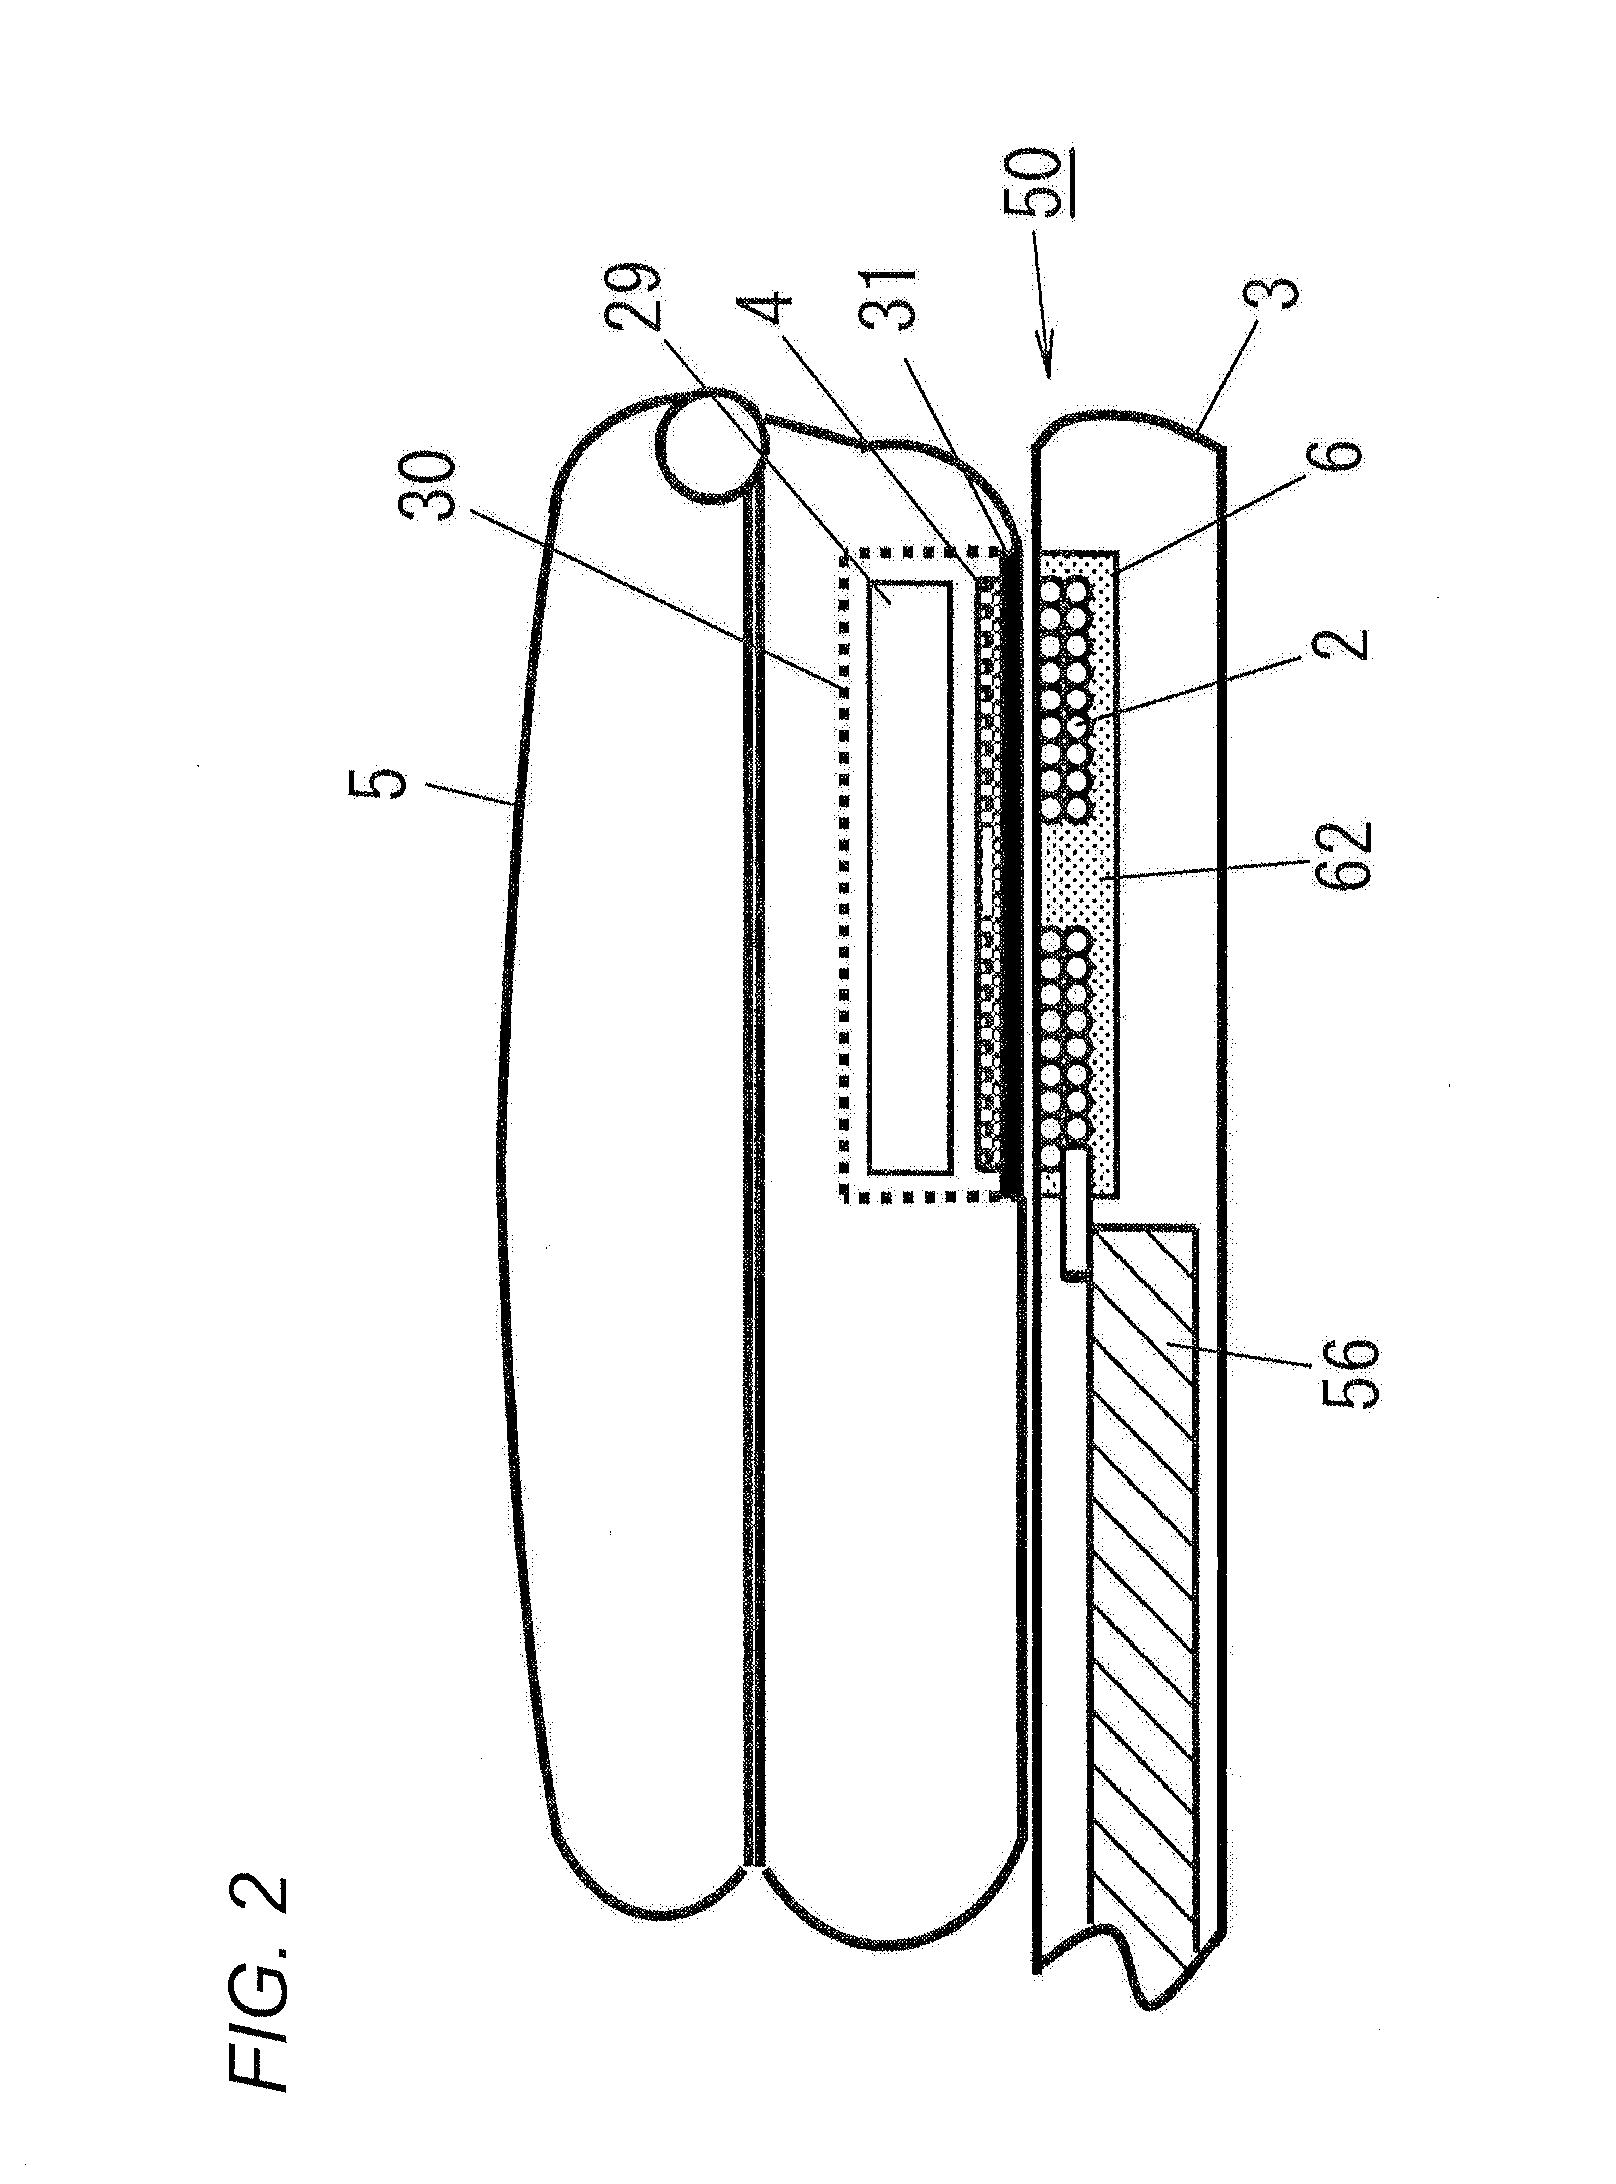 Planar coil and contactless electric power transmission device using the same